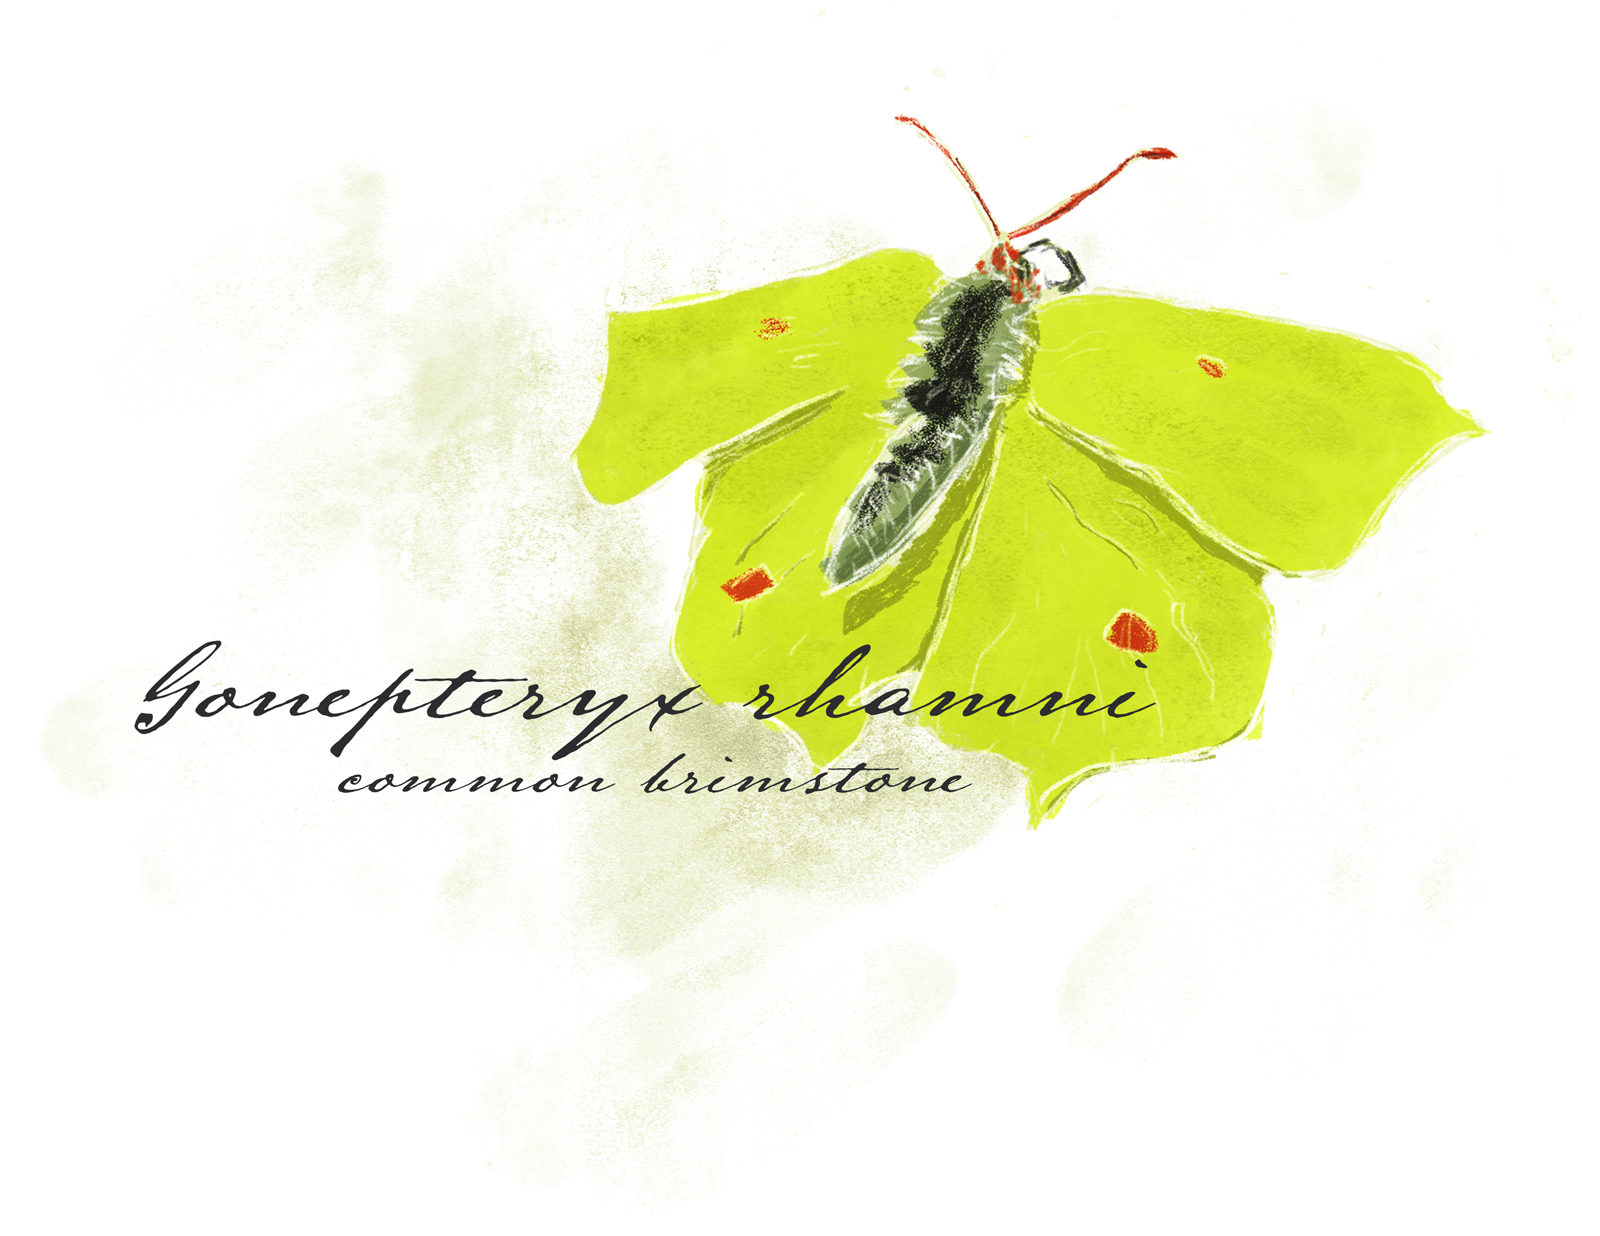 painting of a common brimstone butterfly